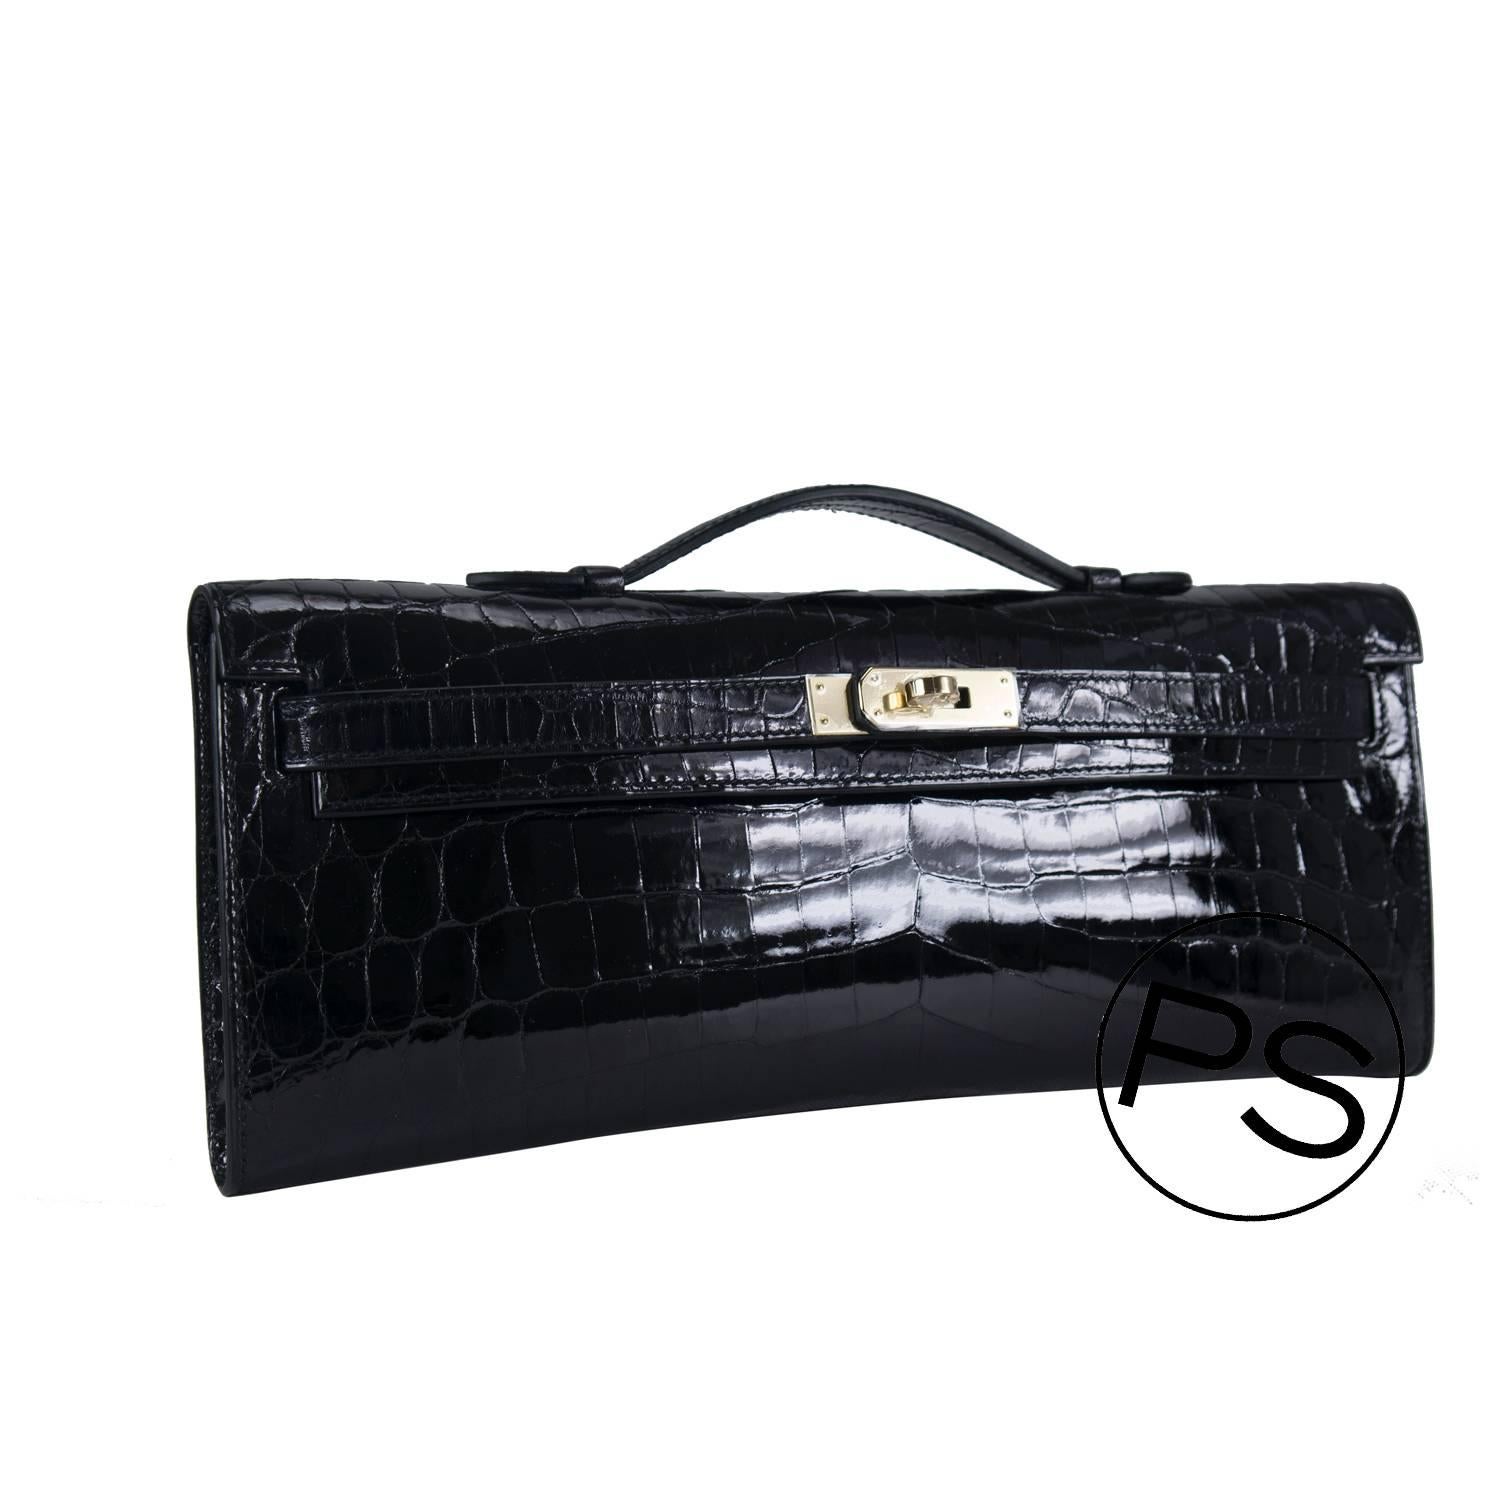 Hermes  Kelly Cut Crocodile Niloticus Black Gold Hardware 2015.

Bought it in Hermes store in 2015.

Pre-owned and never used.

Model: Kelly Cut.

Color: Black.

Size: 23high x 32width x 10.5deep in cm.

Details:

*Protective felt